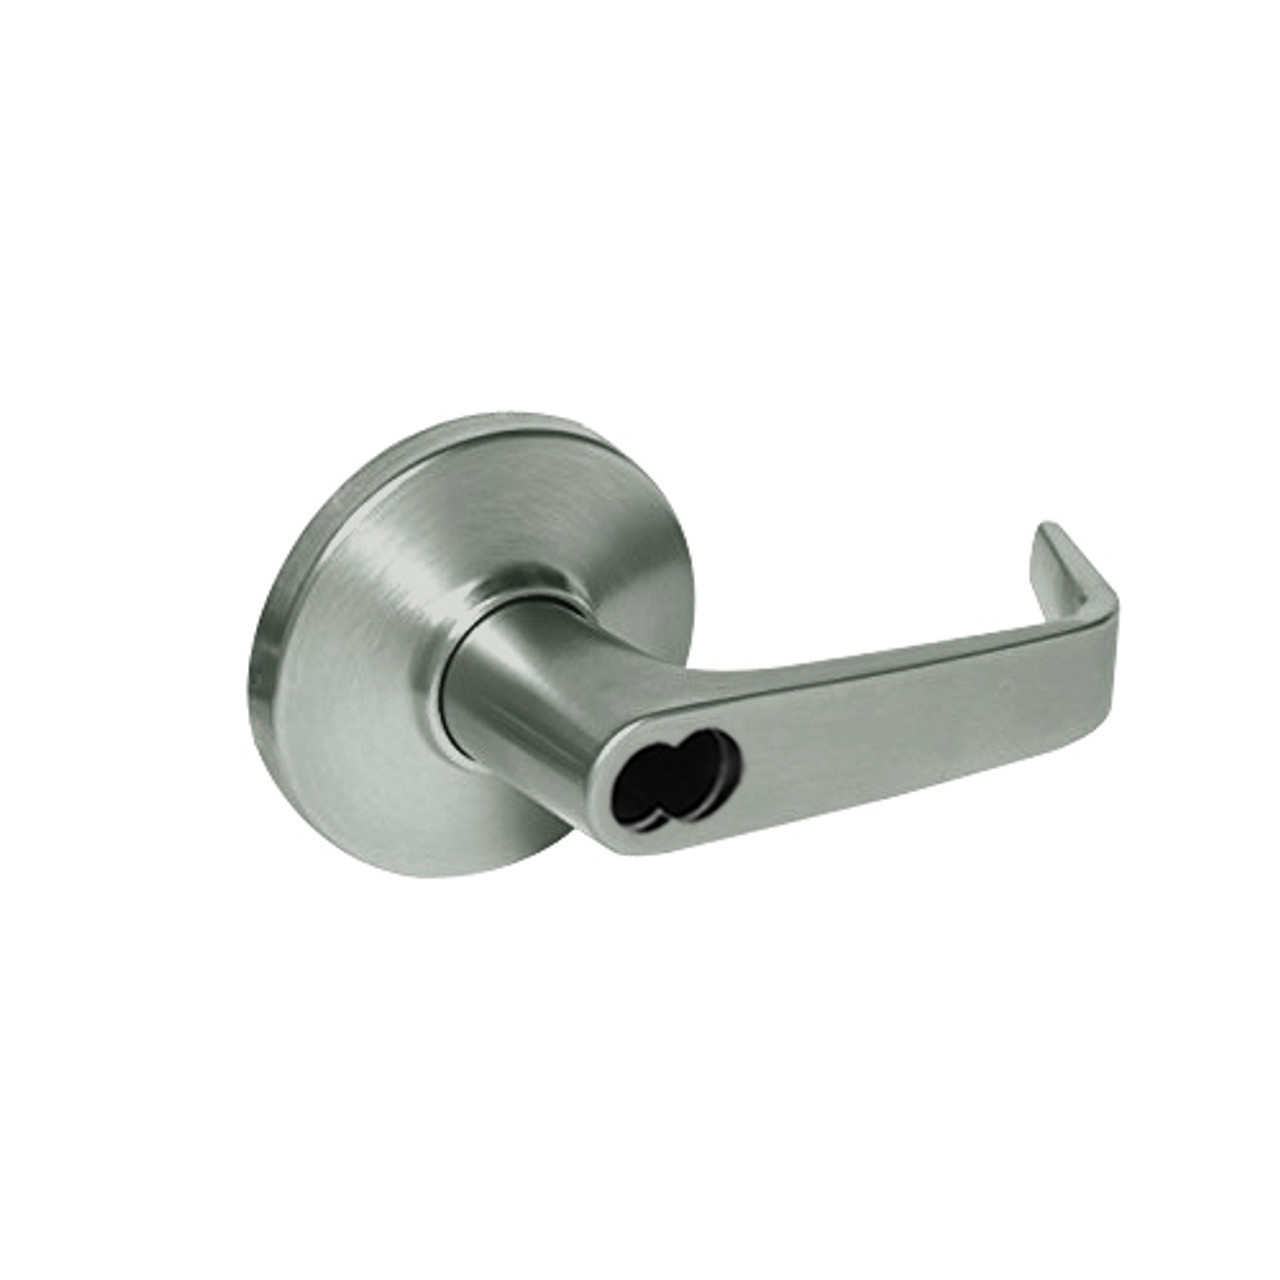 9K37YR15DSTK619LM Best 9K Series Special Function Cylindrical Lever Locks with Contour Angle with Return Lever Design Accept 7 Pin Best Core in Satin Nickel